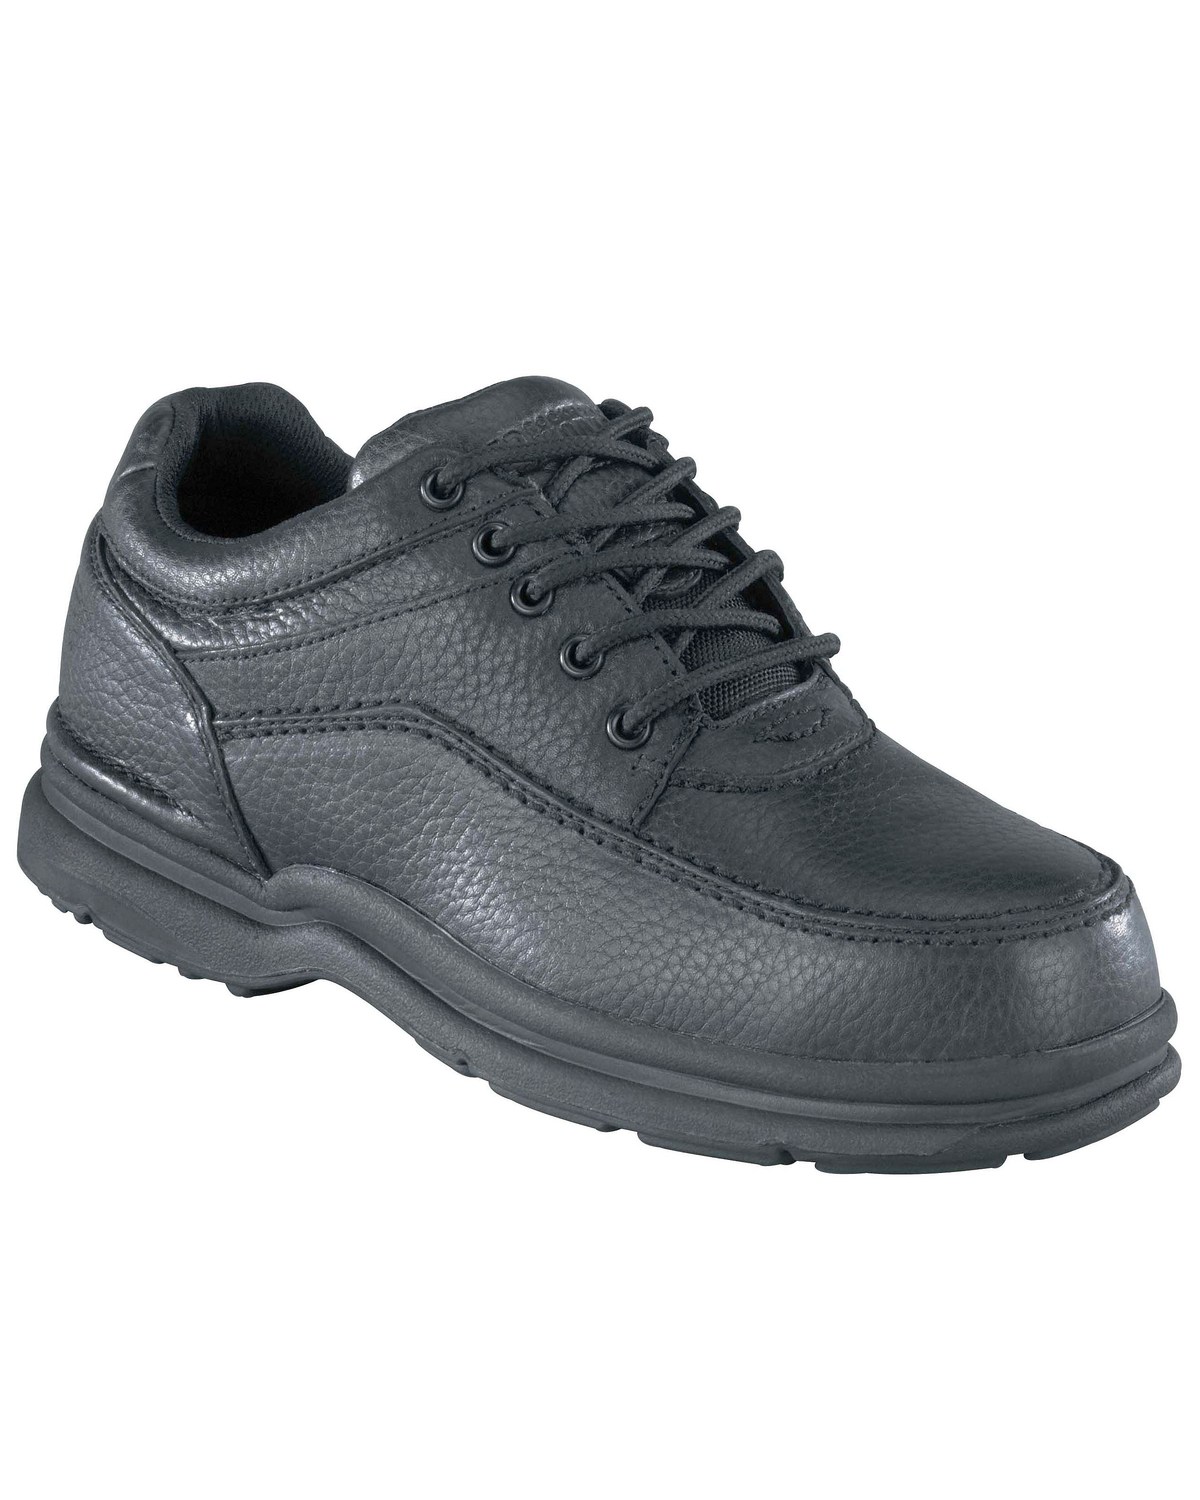 Rockport Works World Tour Casual Oxford Work Shoes - Steel Toe